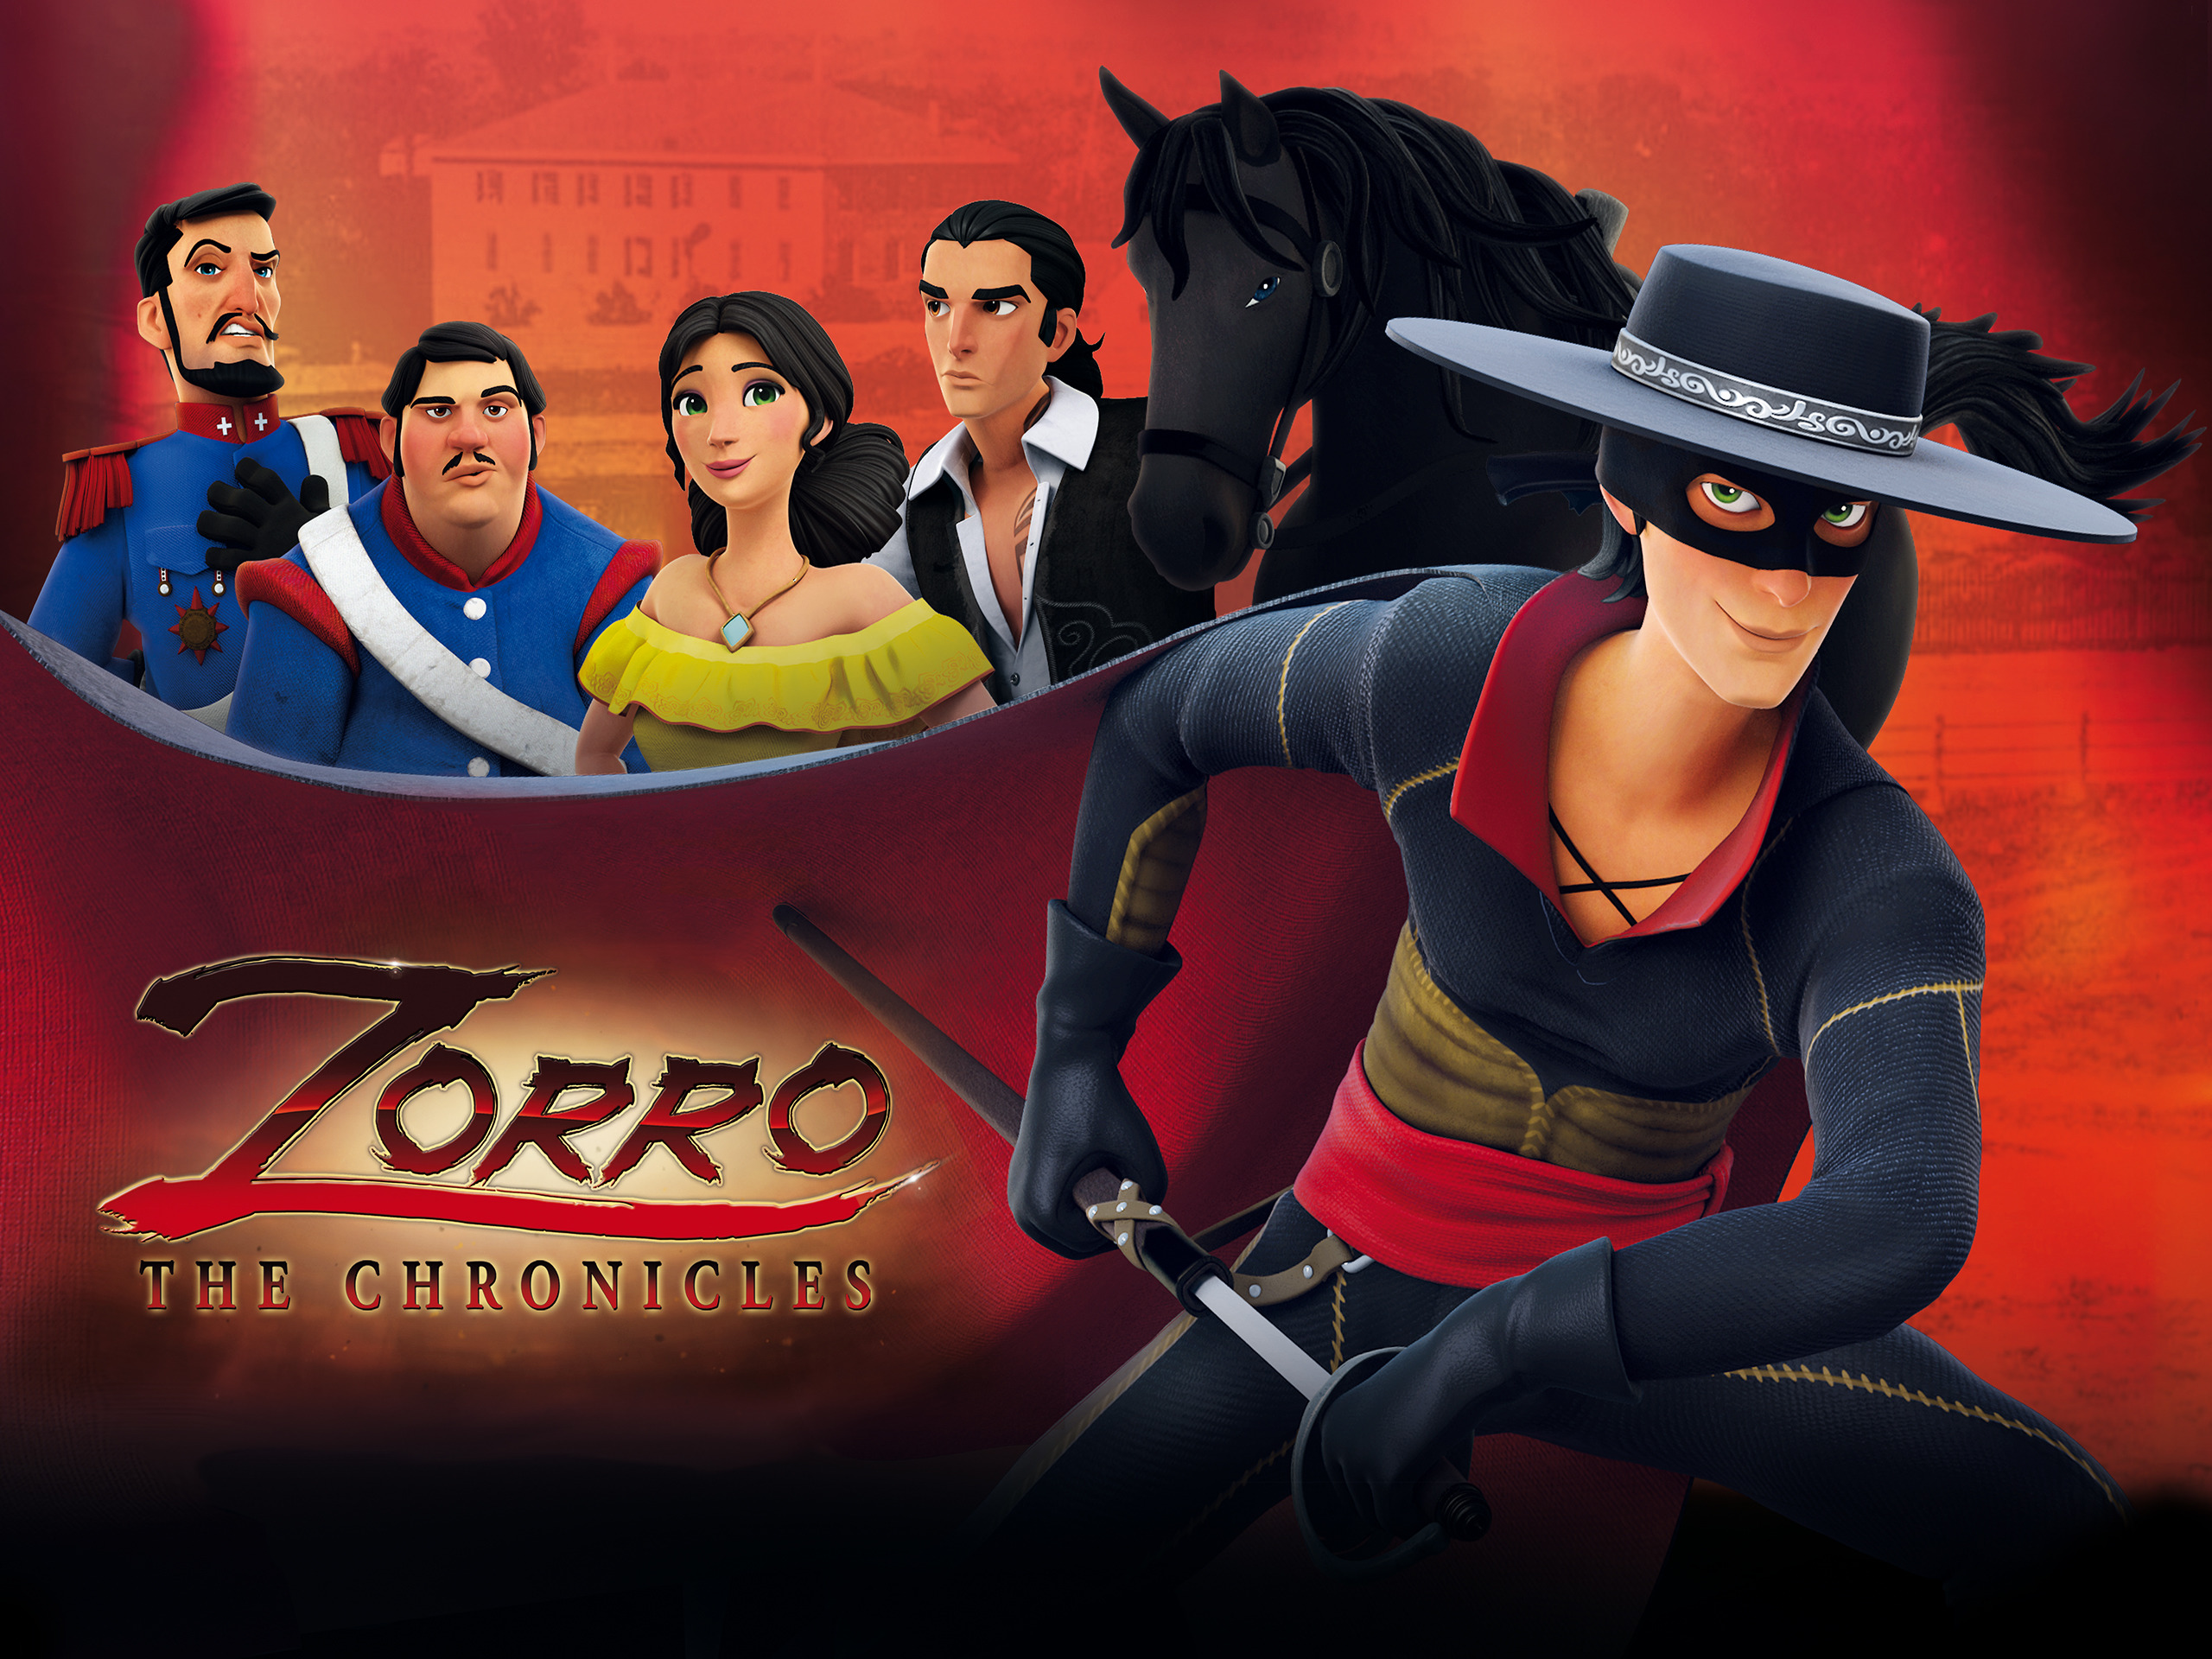 Zorro The Chronicles Wallpapers Wallpaper Cave